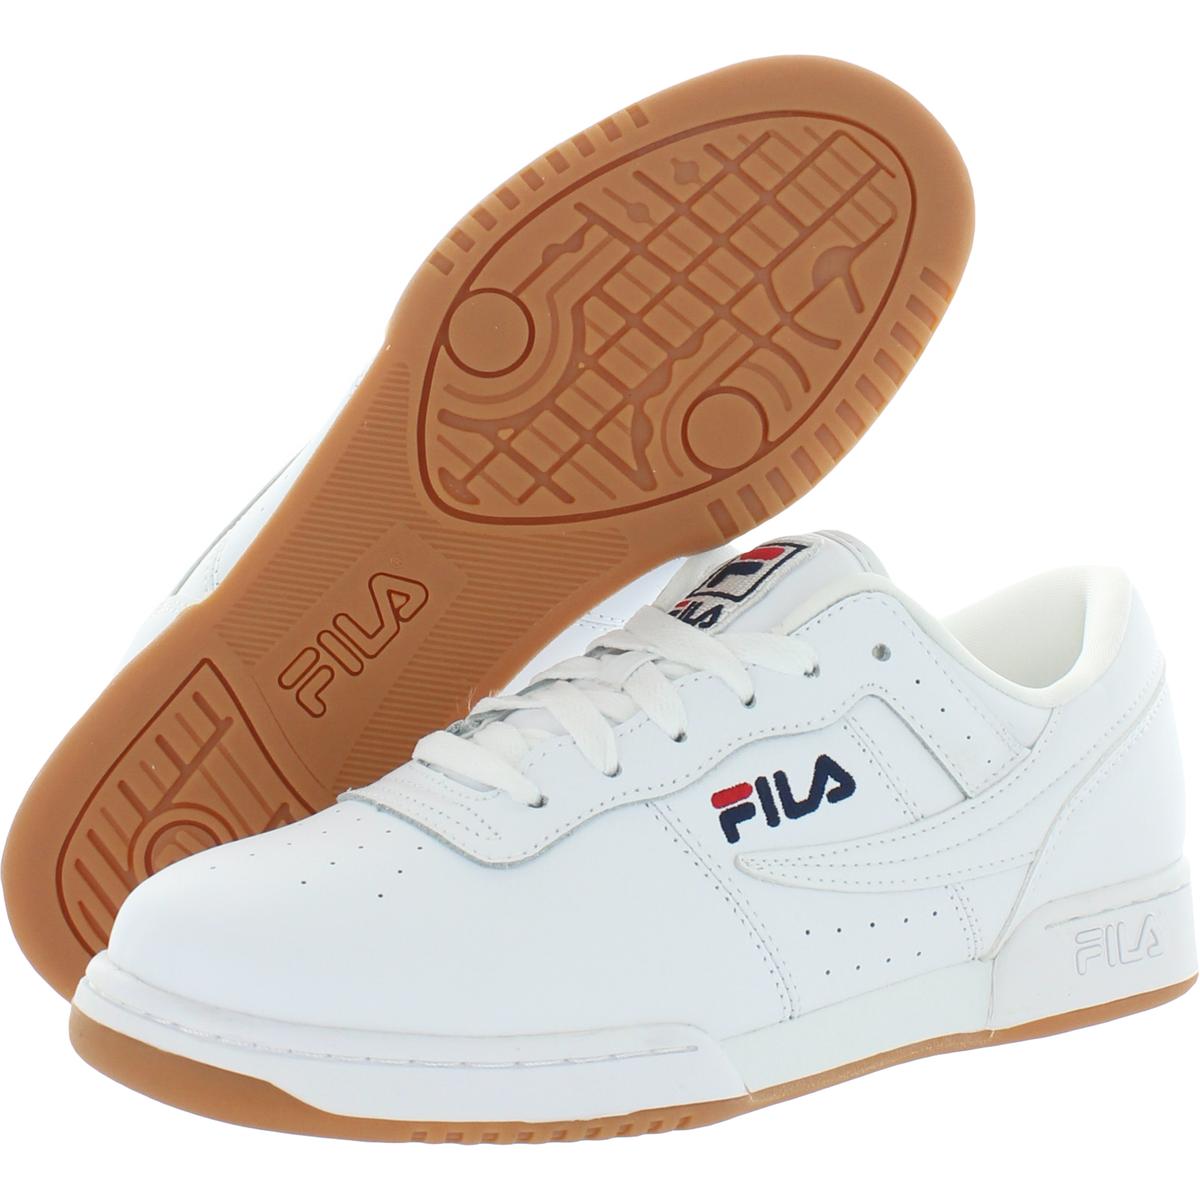 Fila Mens Original Fitness Leather Running Trainers Sneakers Athletic ...